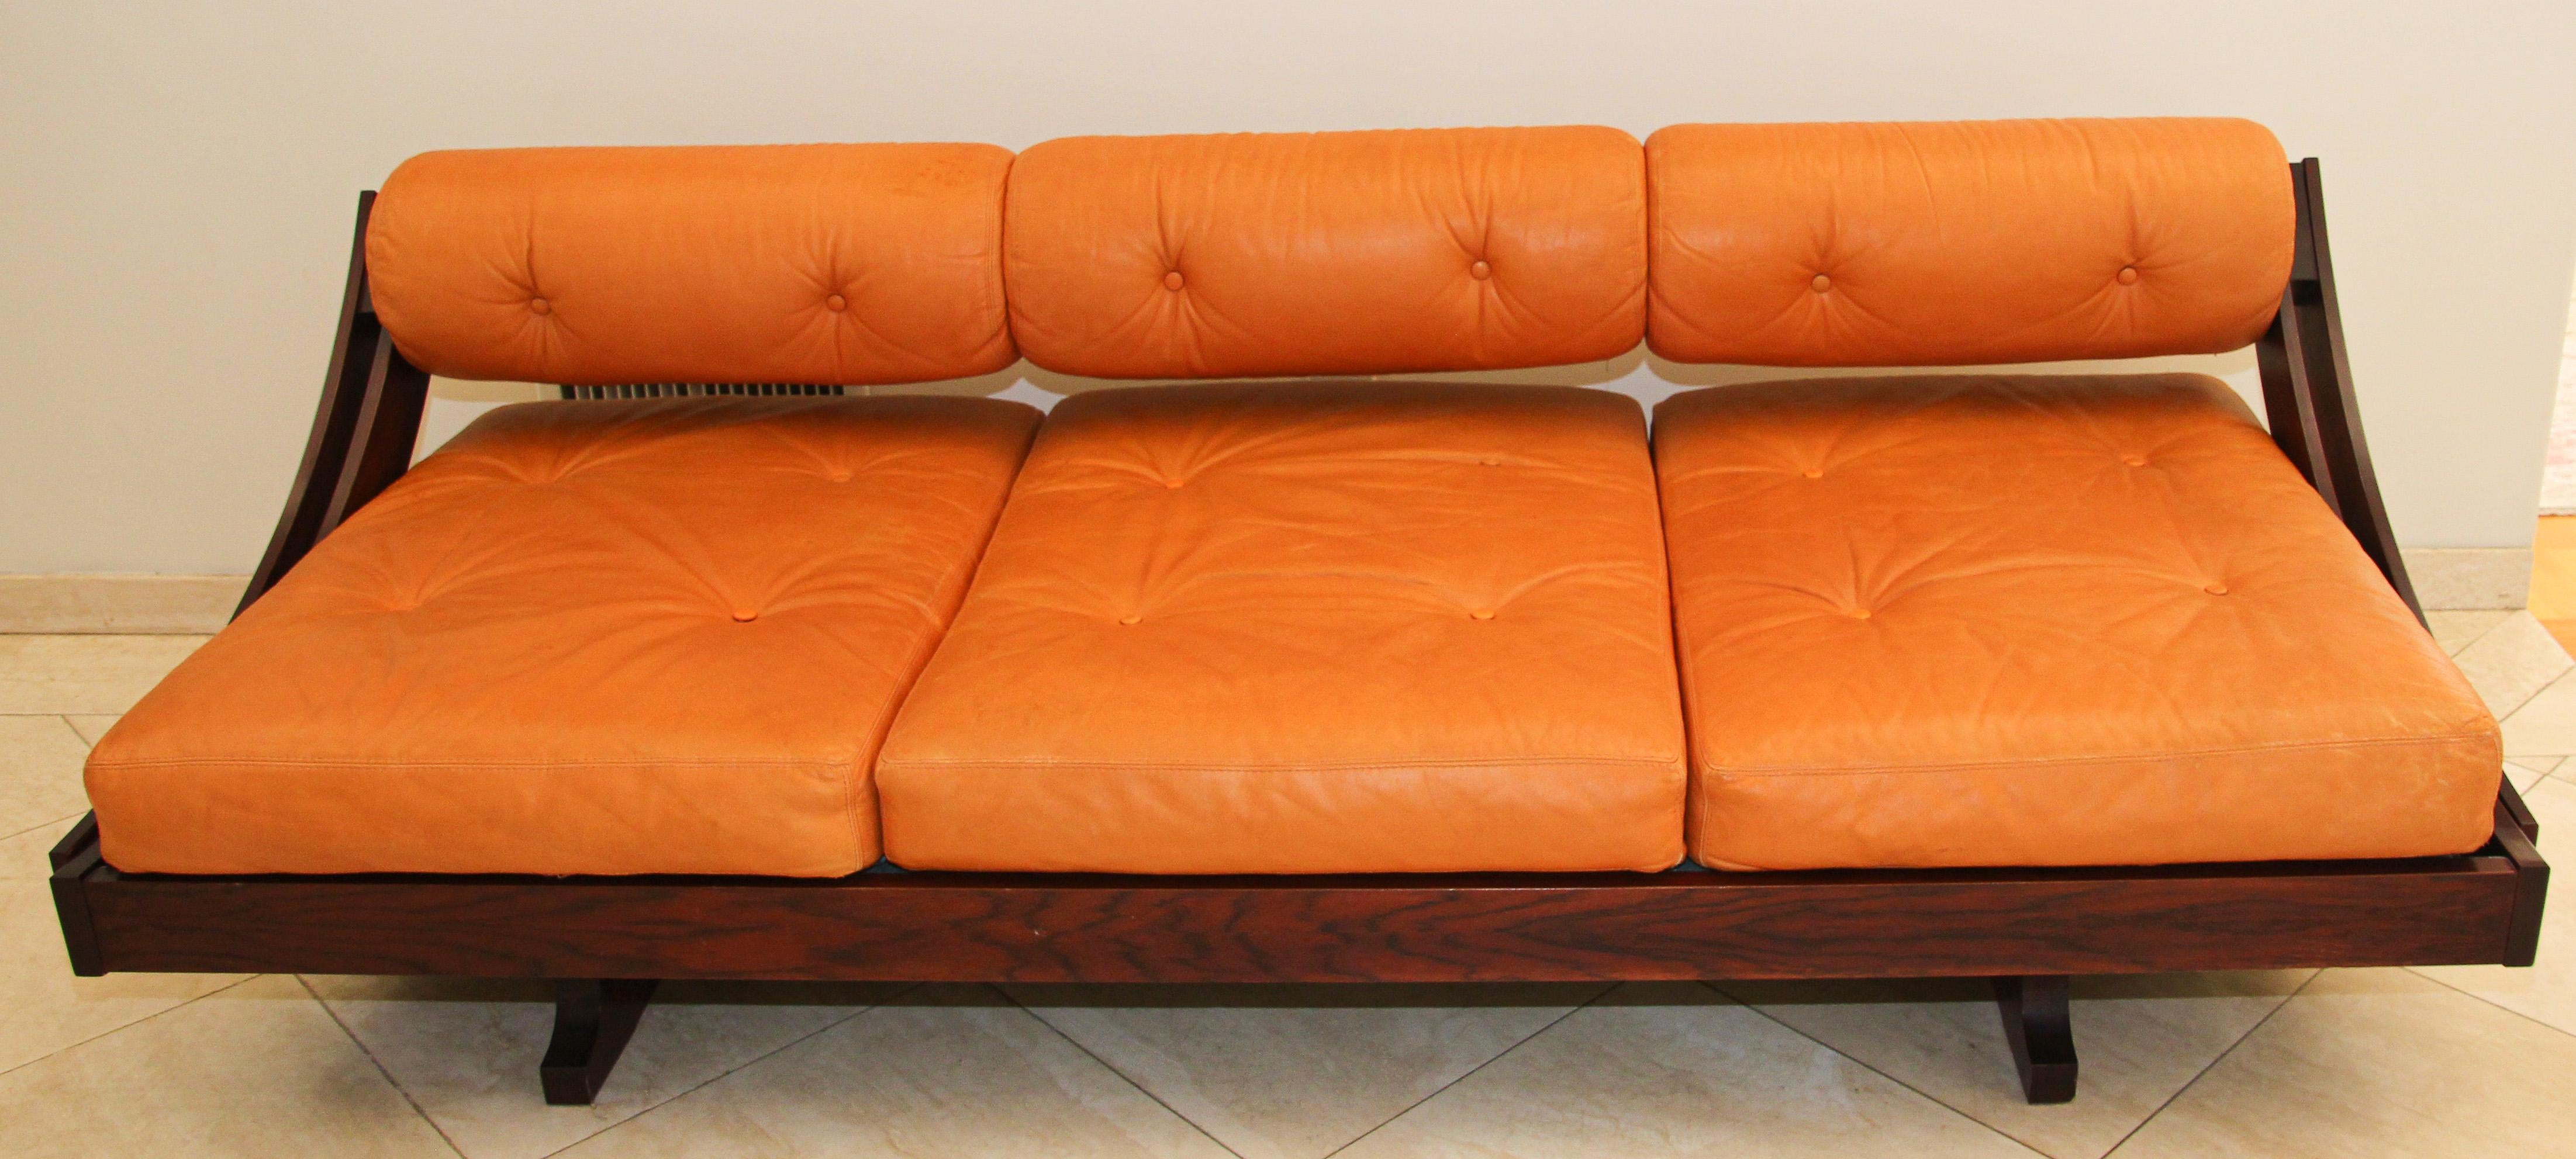 Gianni Songia GS195 leather daybed and sofa for Sormani, Italy, 1963
This three-seat daybed was designed by Gianni Songia for Sormani, Italy, in 1963.
Model GS-195 with leather cushions.
Rare Italian daybed designed by Gianni Songia for Sormani